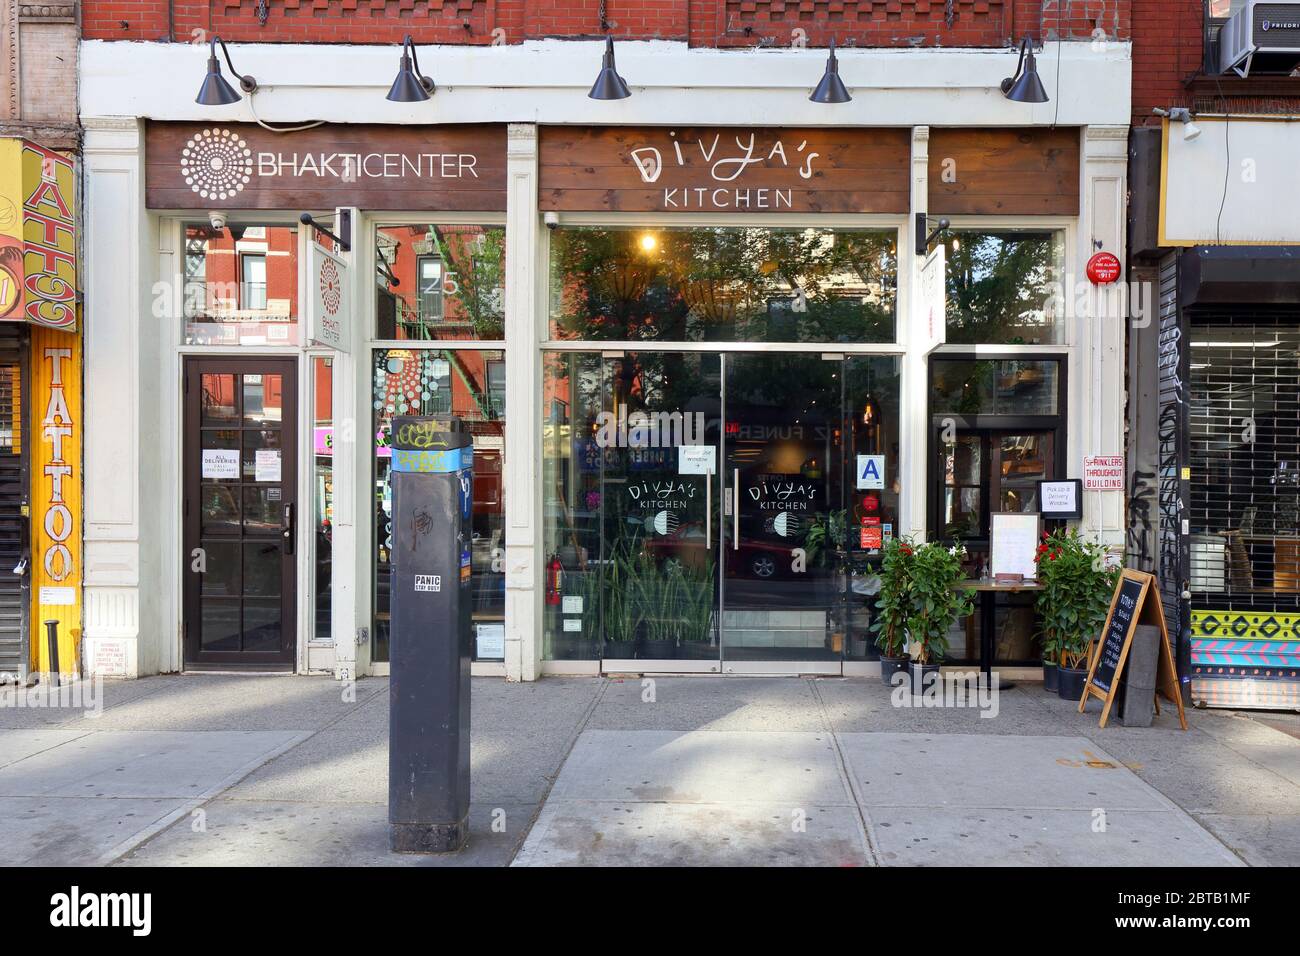 Bhaki Center, Divya's Kitchen, 25 First Avenue, New York, NY. A yoga, cultural center, and Ayurveda vegetarian restaurant in Manhattan's East Village Stock Photo